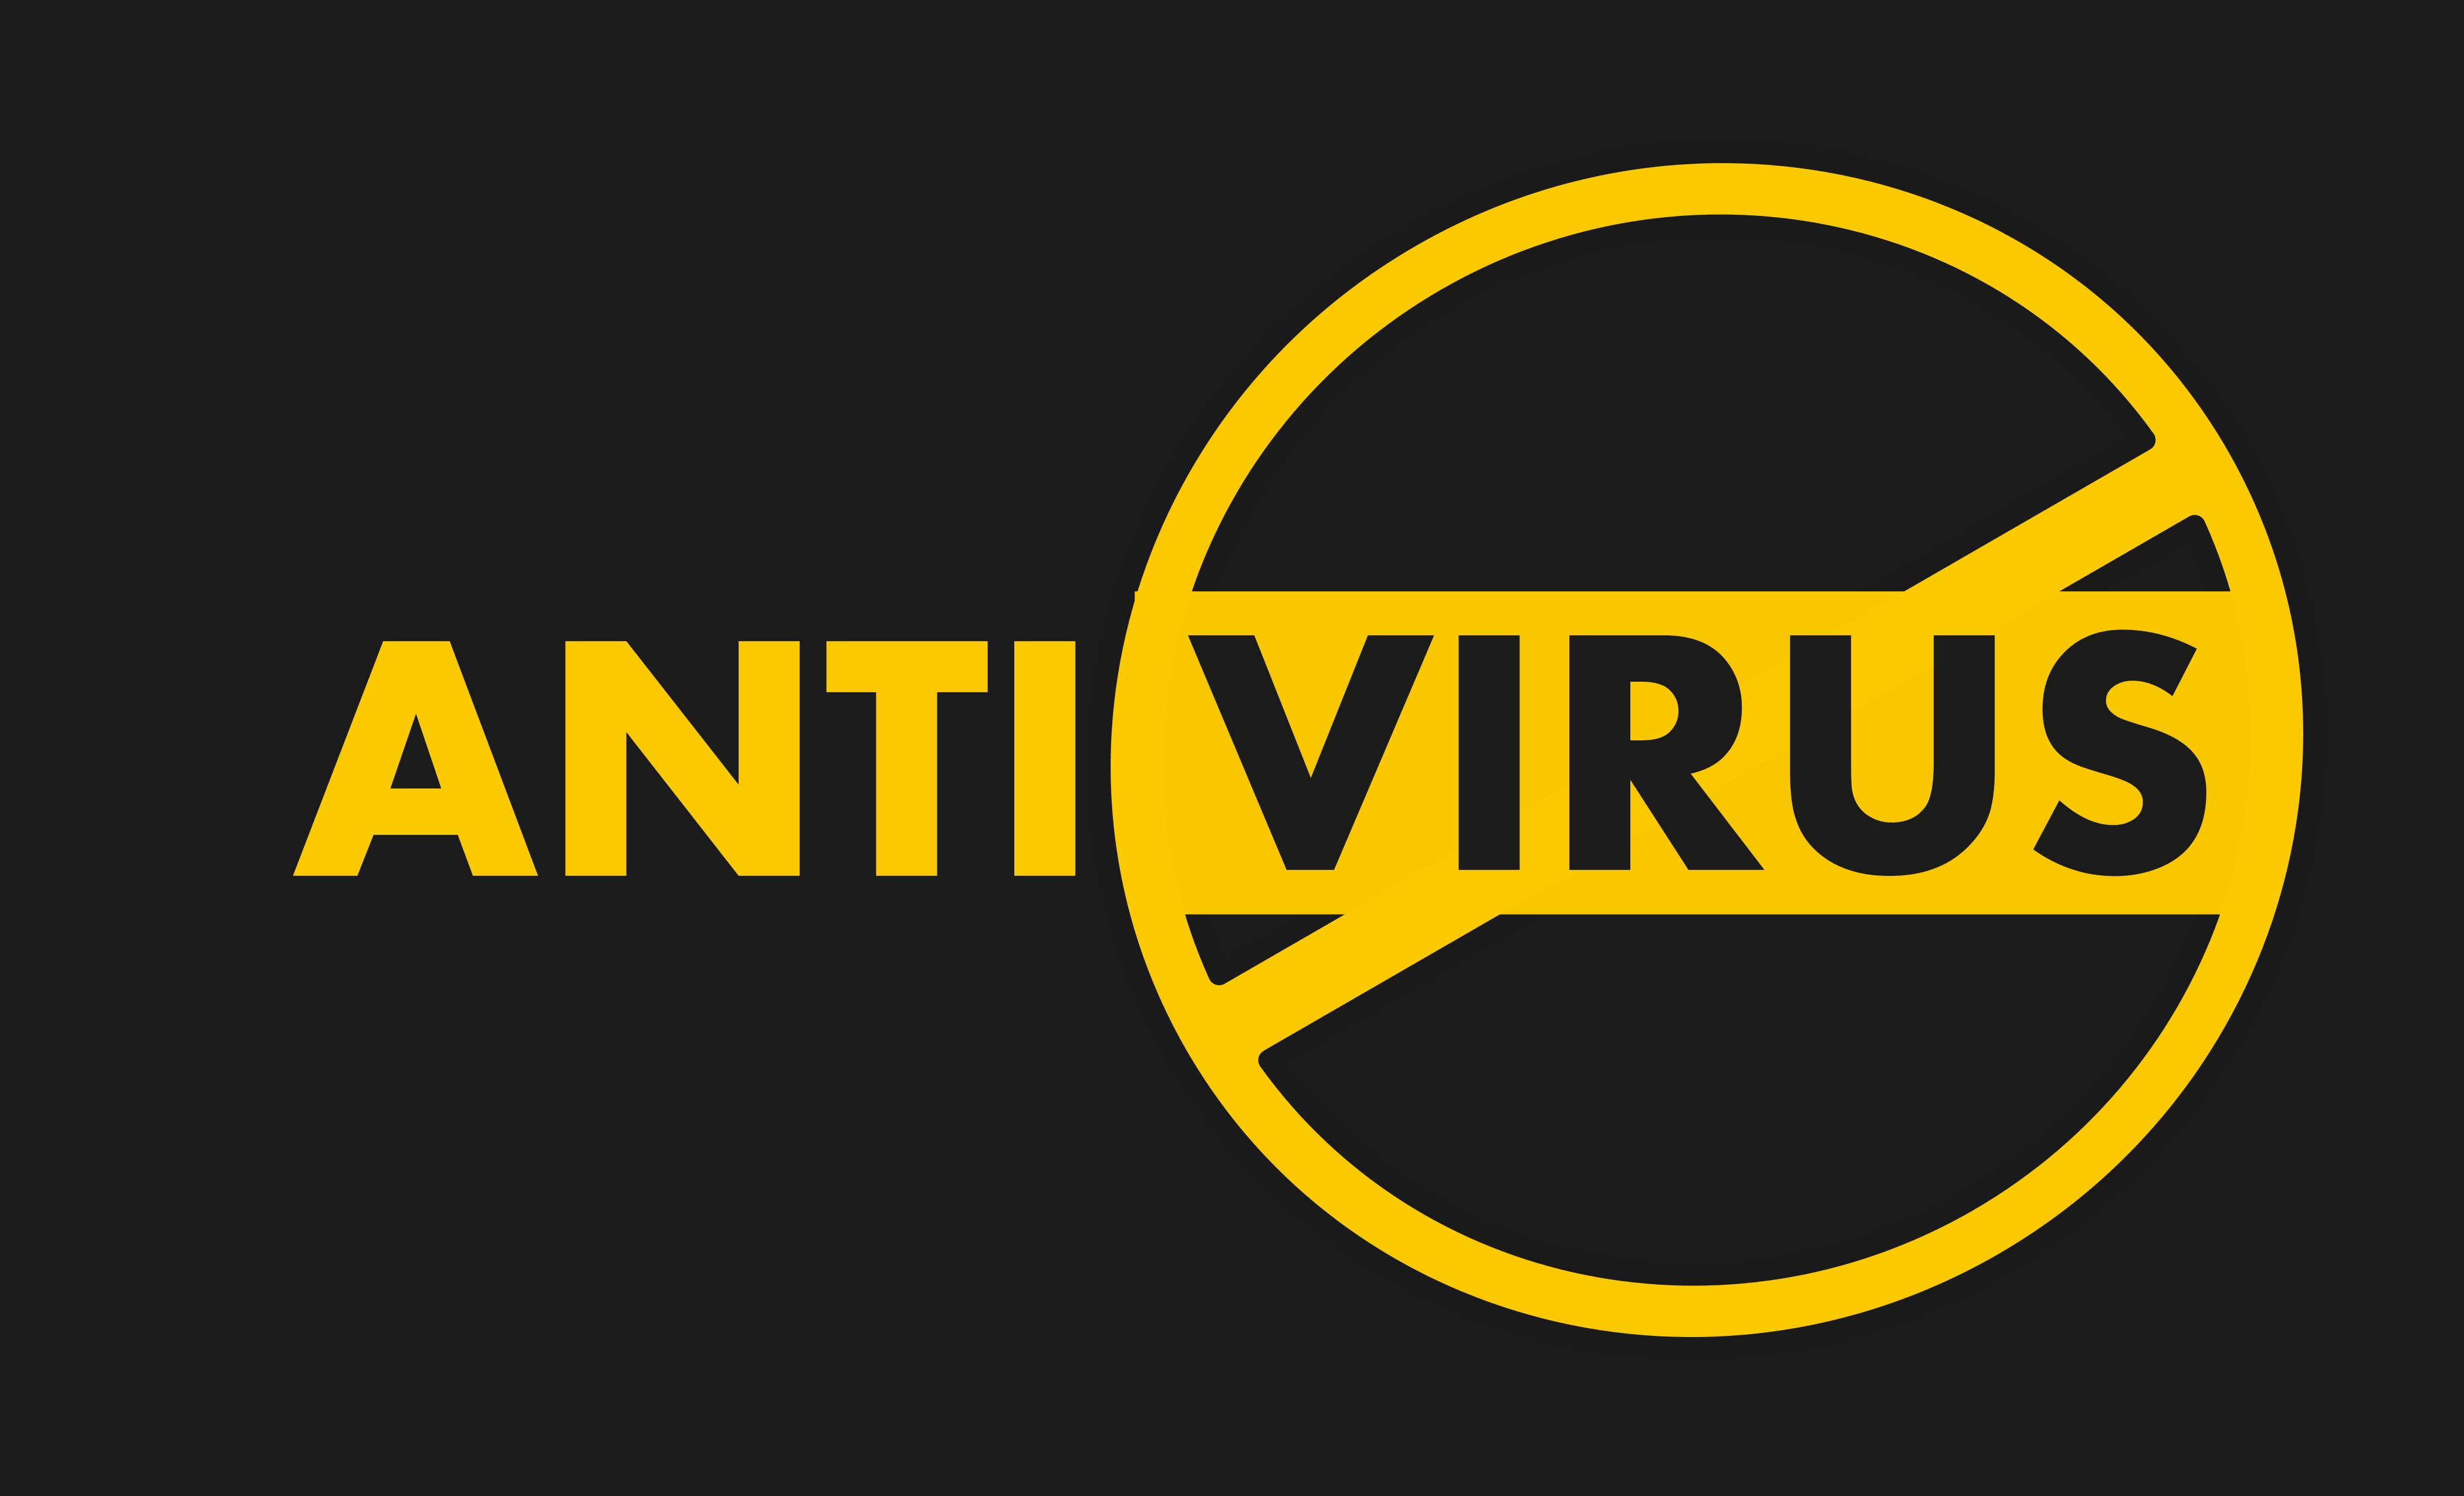 Problems With Anti-Virus Software and Alternative Solutions